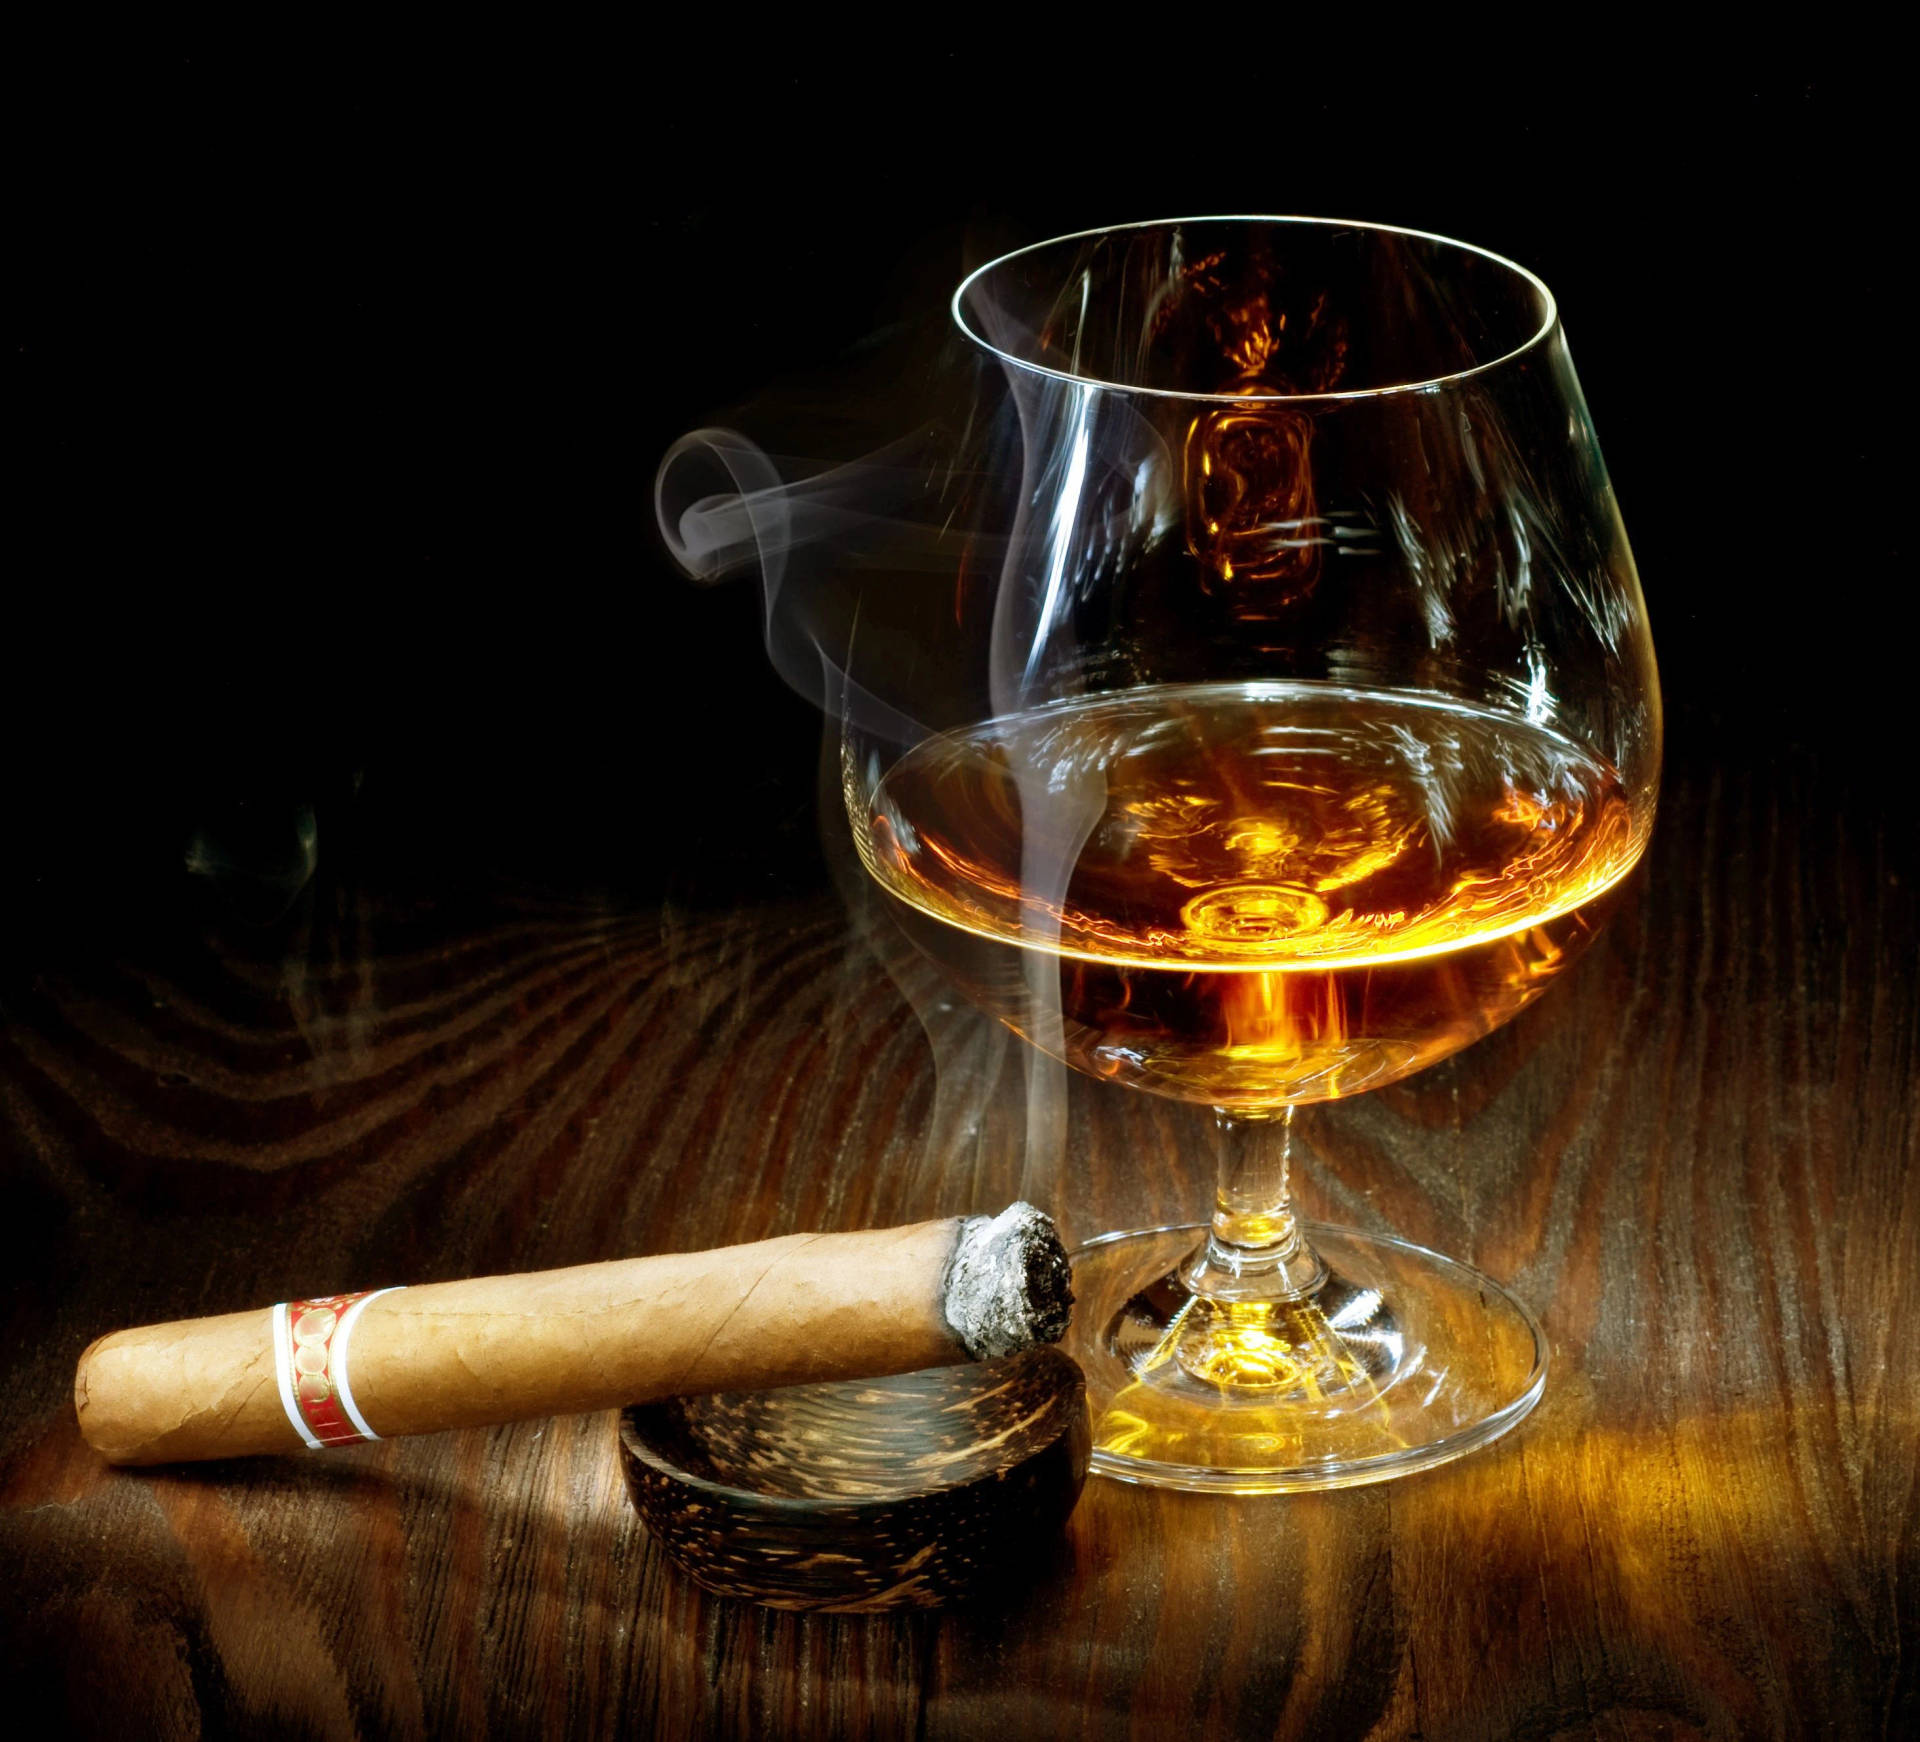 A Smooth Brandy Experience - Pairing Drink With Tobacco Background